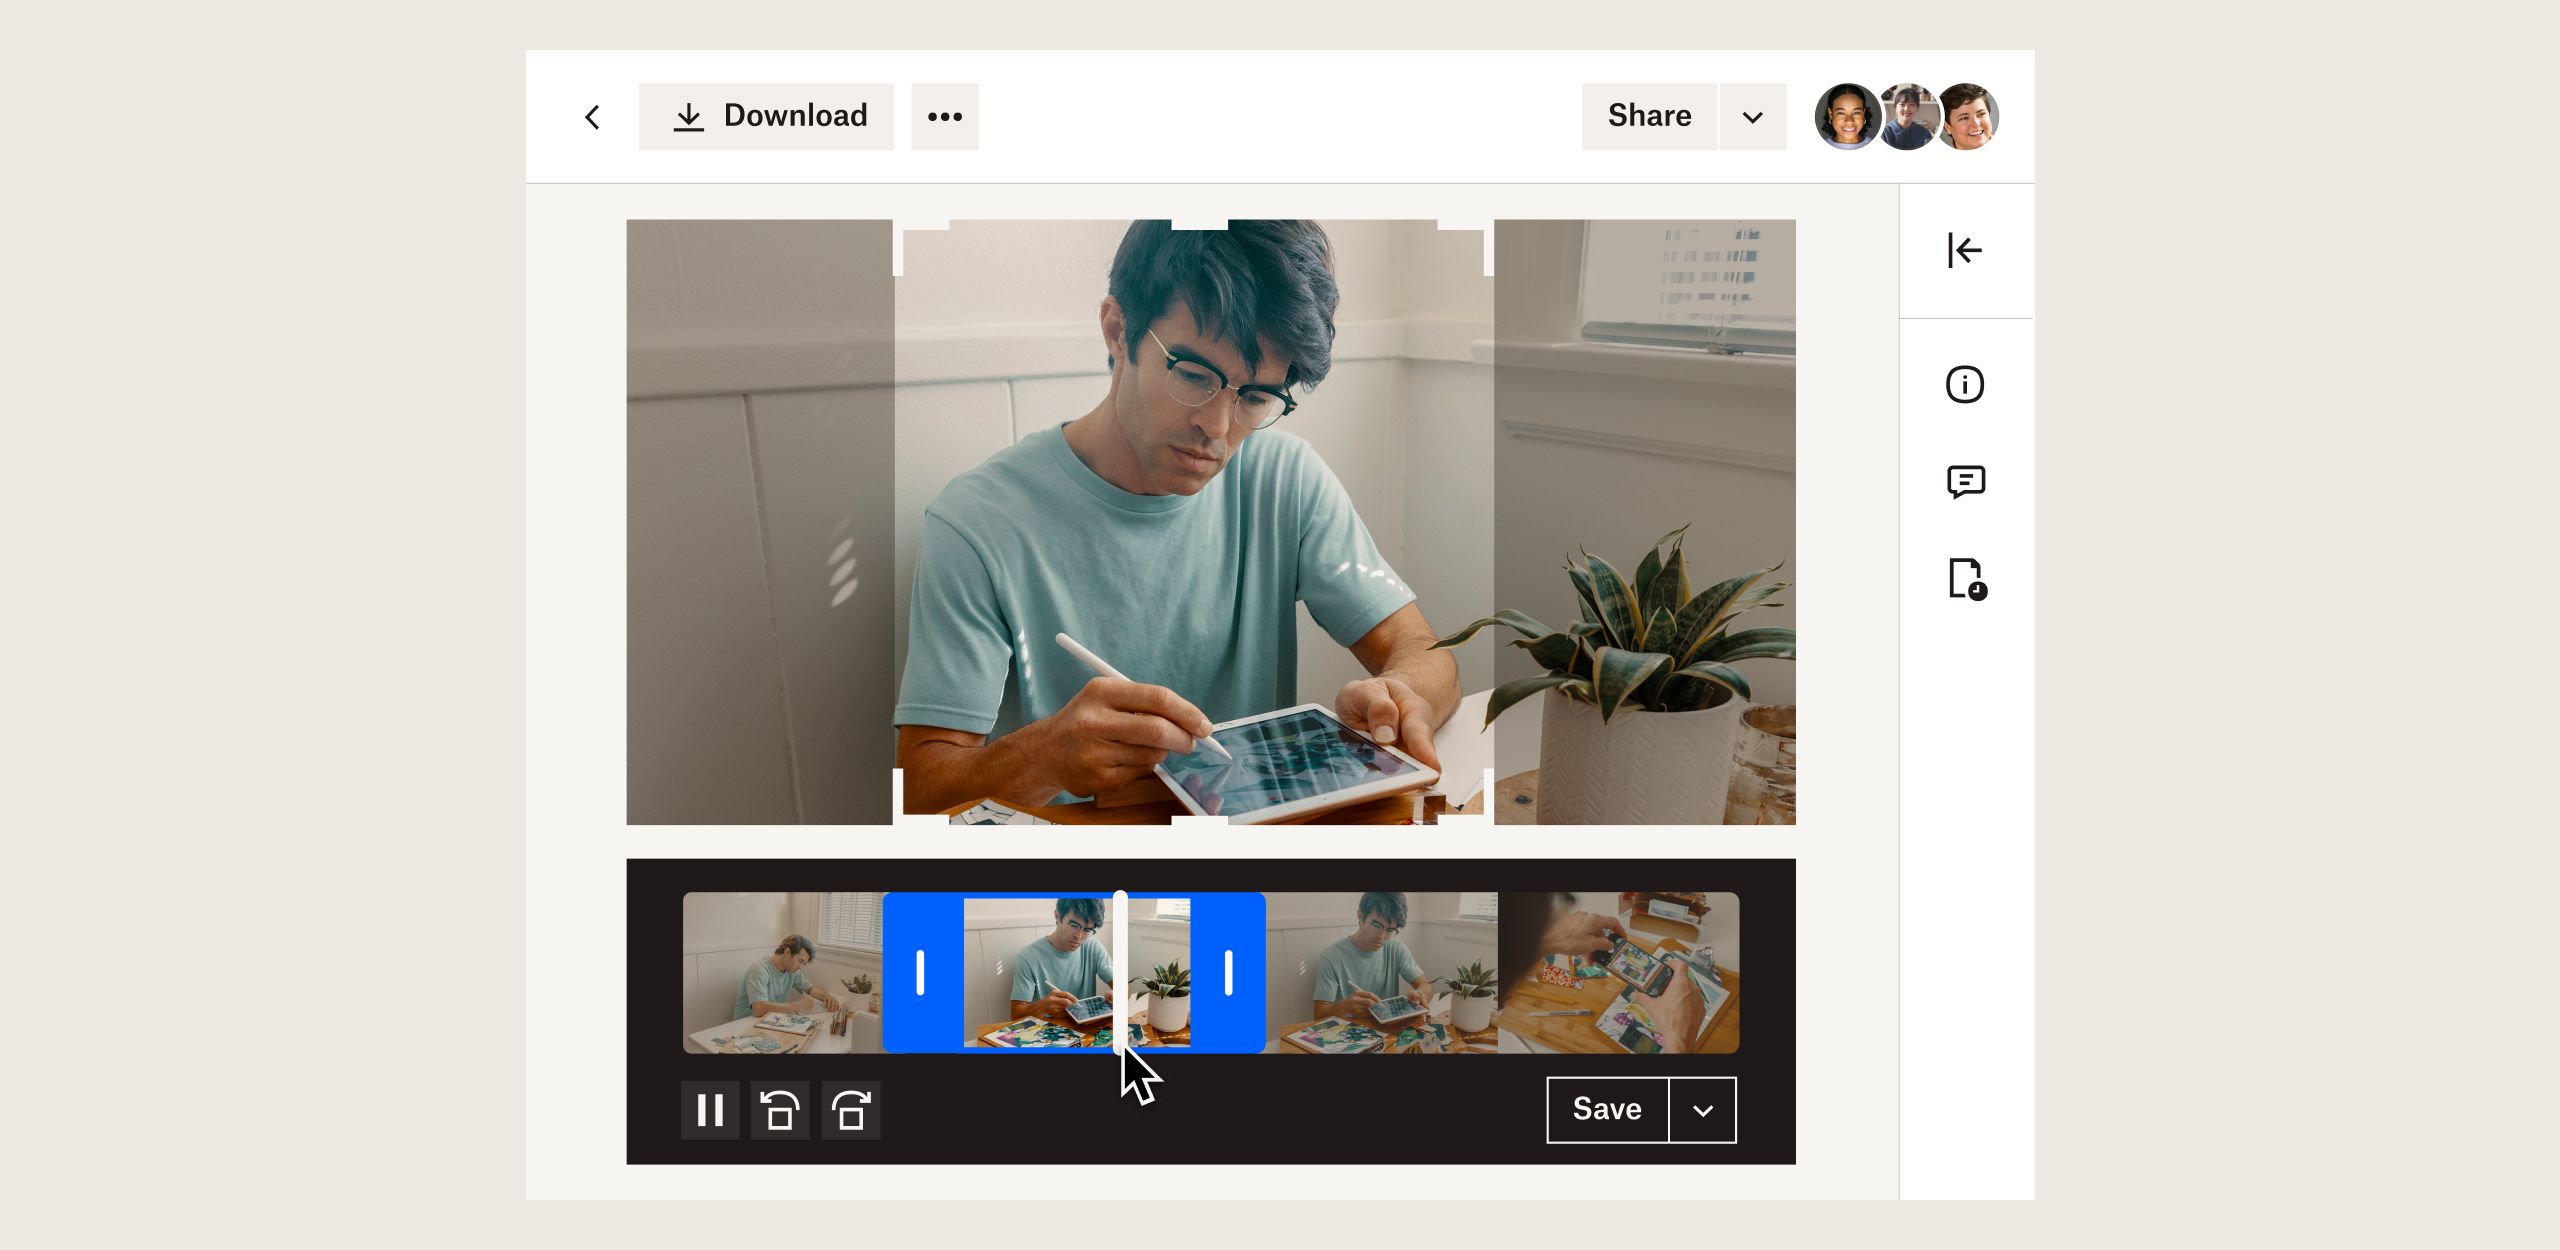 Product UI shows video editing features like timeline cropping